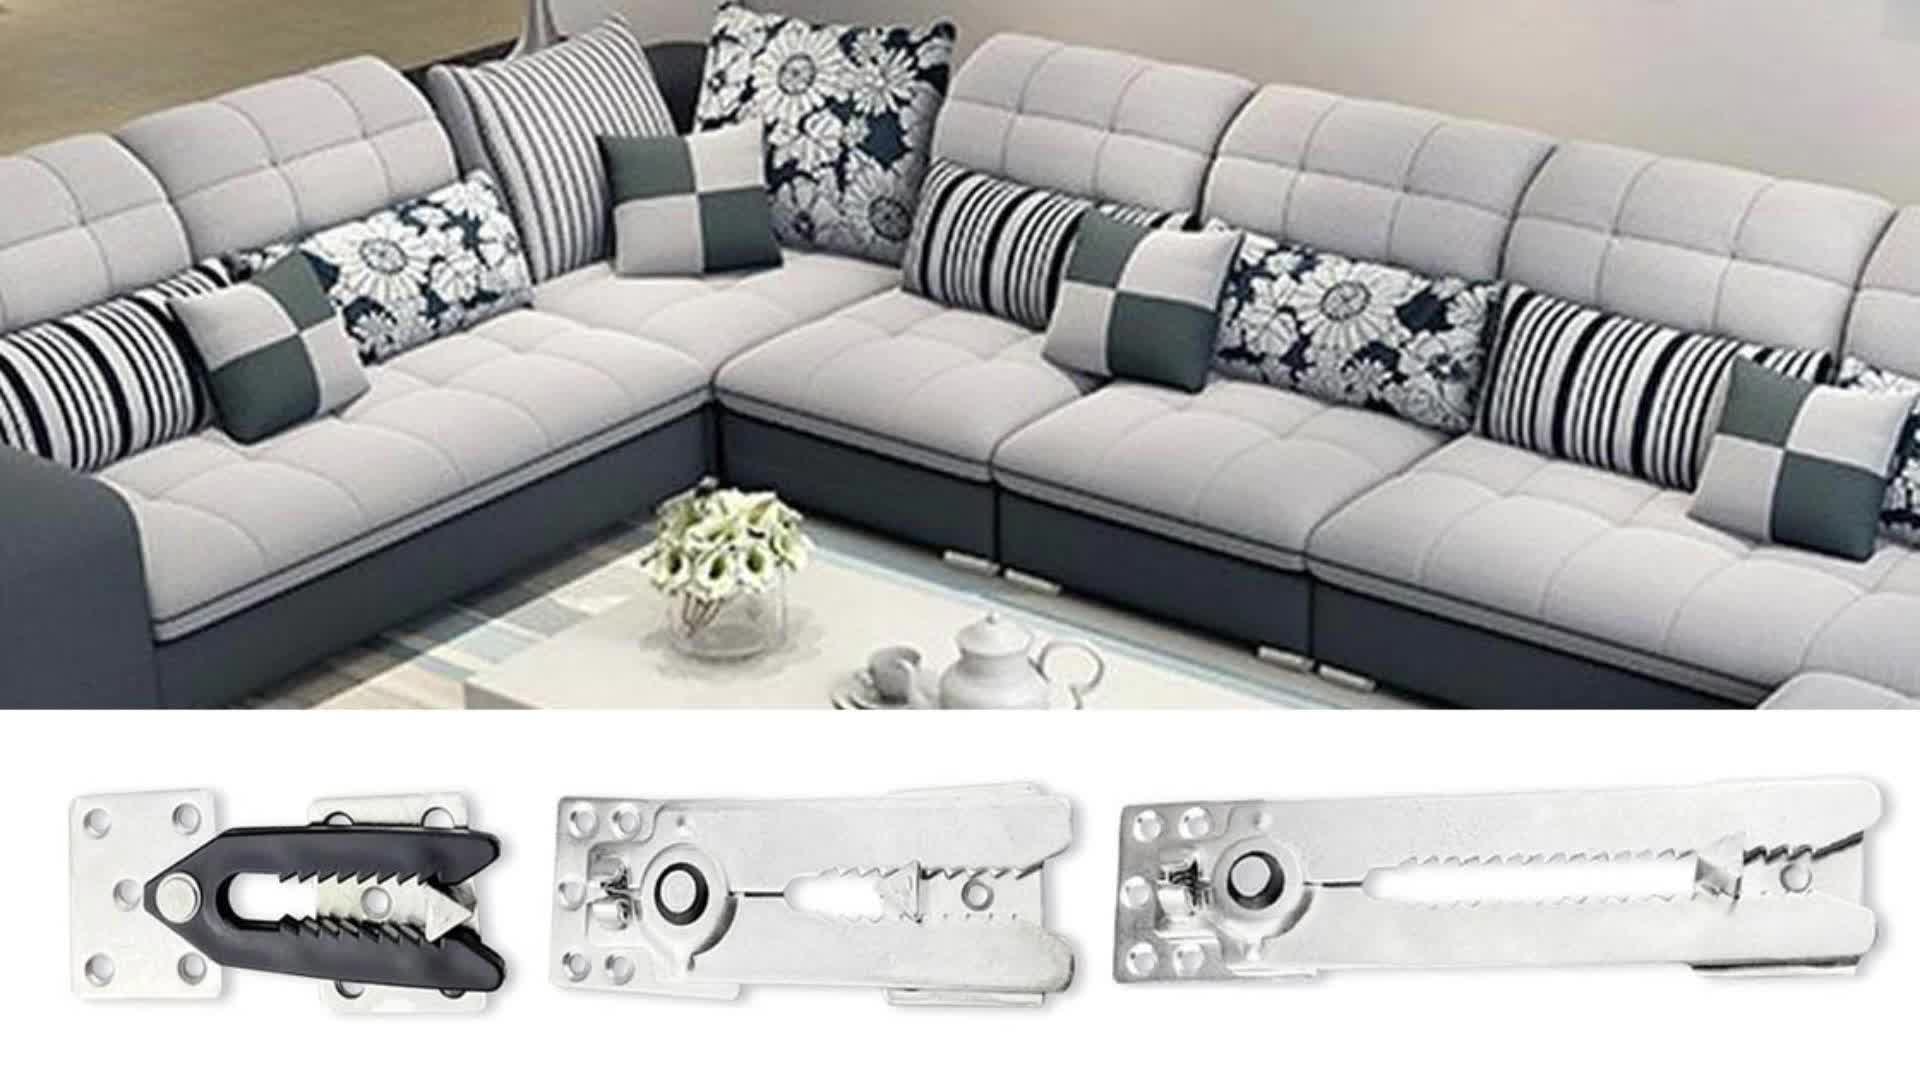 Sectional Furniture Sturdy Couch Connector Accessories Hardware Fitting  Home Alligator Clip Joint Snap Link Hinges #734